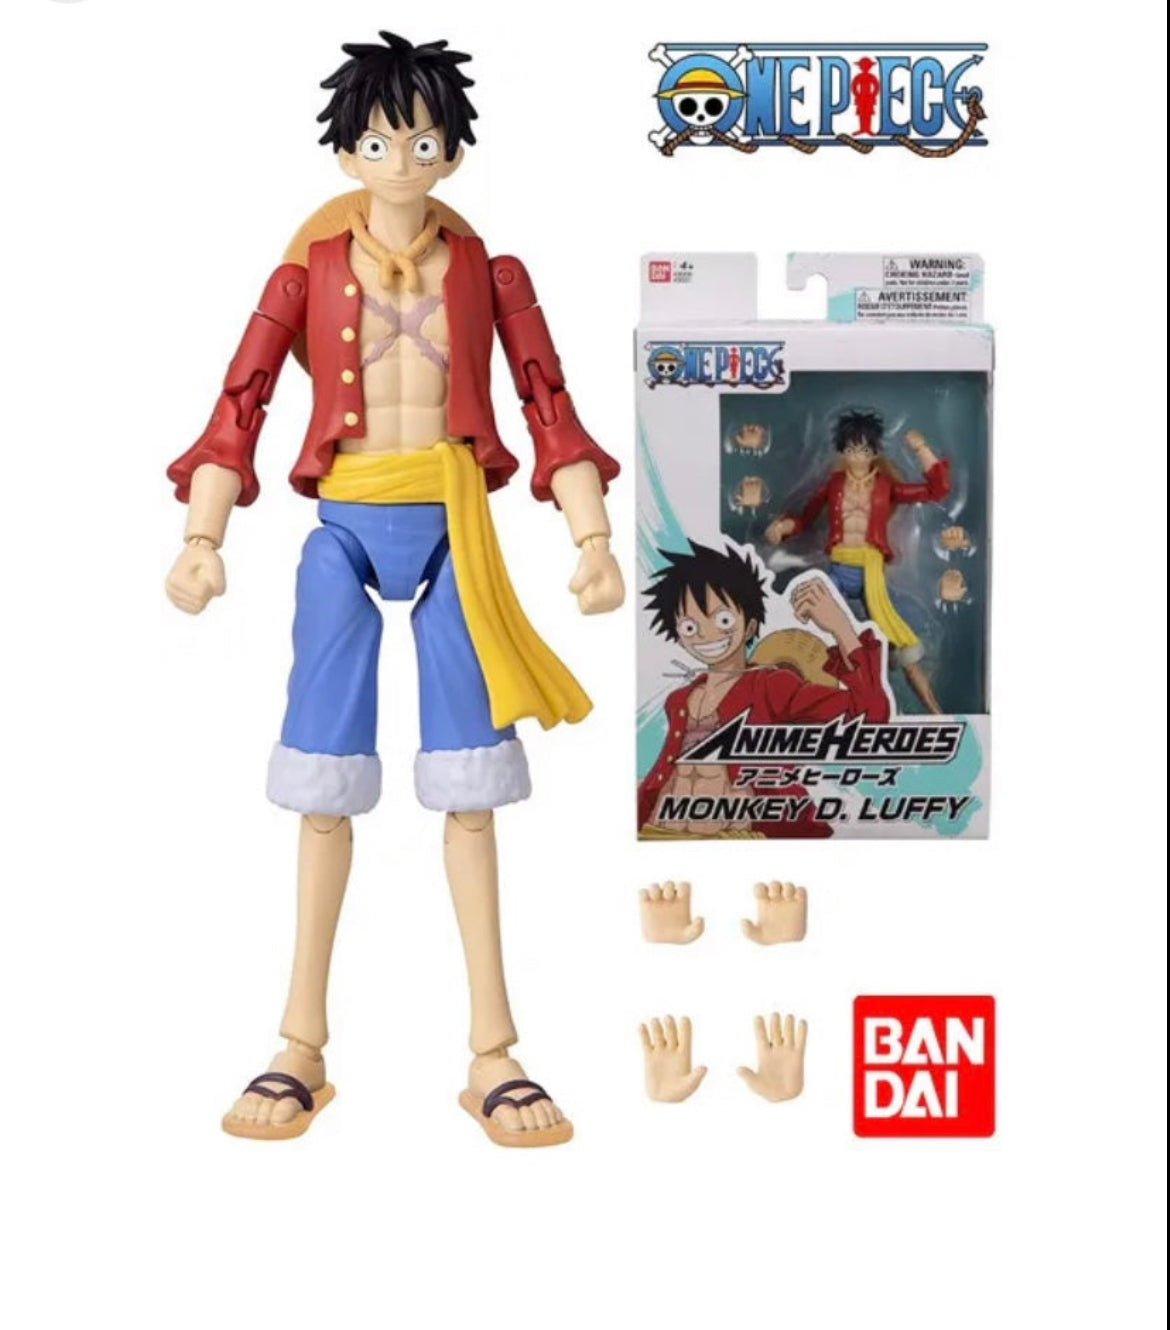 One Piece Anime Heroes- Monkey D. Luffy